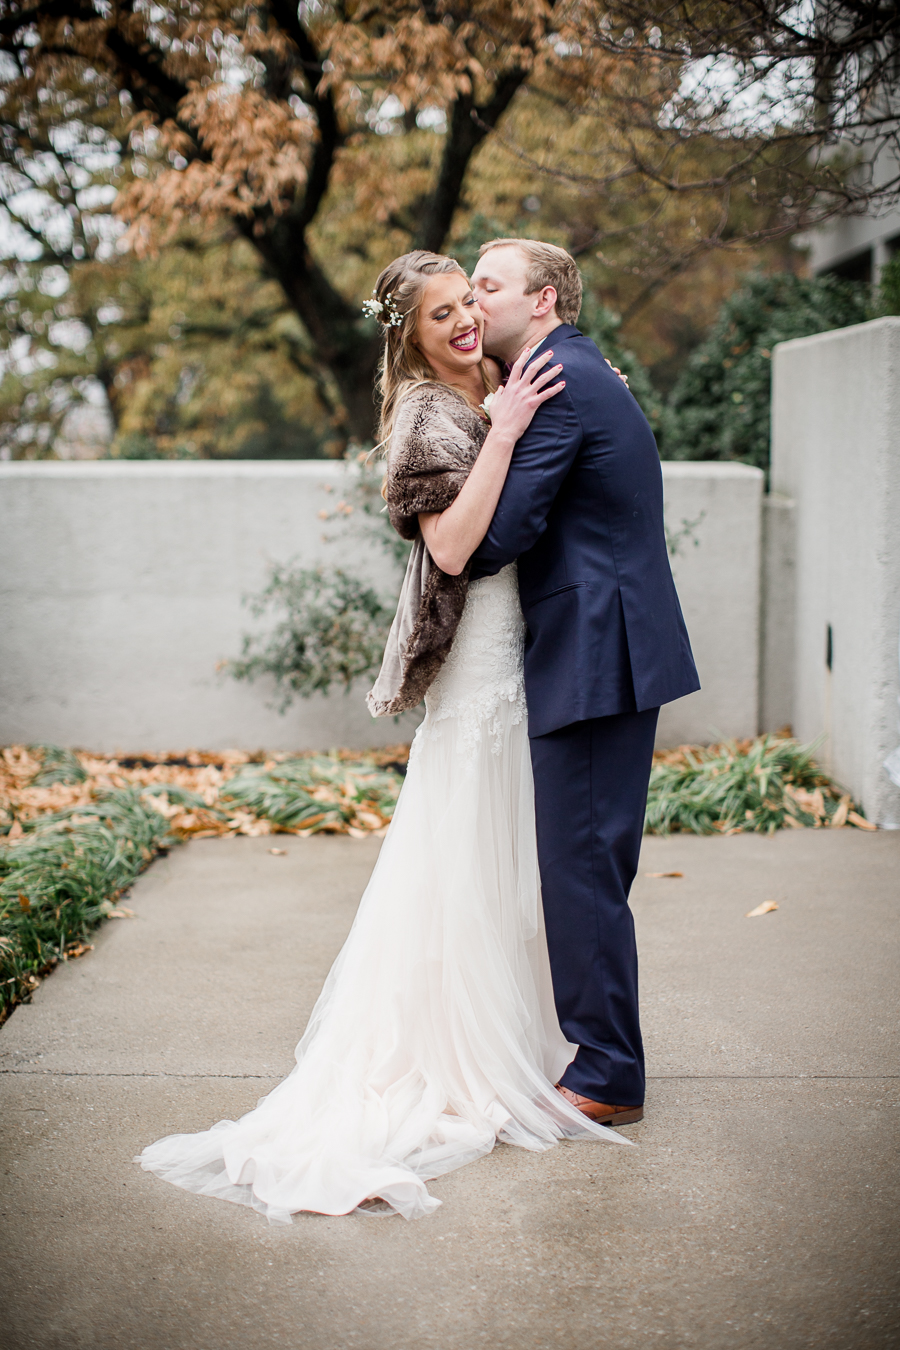 He kisses her on the cheek during the first look pictures at this winter wedding at Knoxville Wedding Venue, Jackson Terminal, by Knoxville Wedding Photographer, Amanda May Photos.